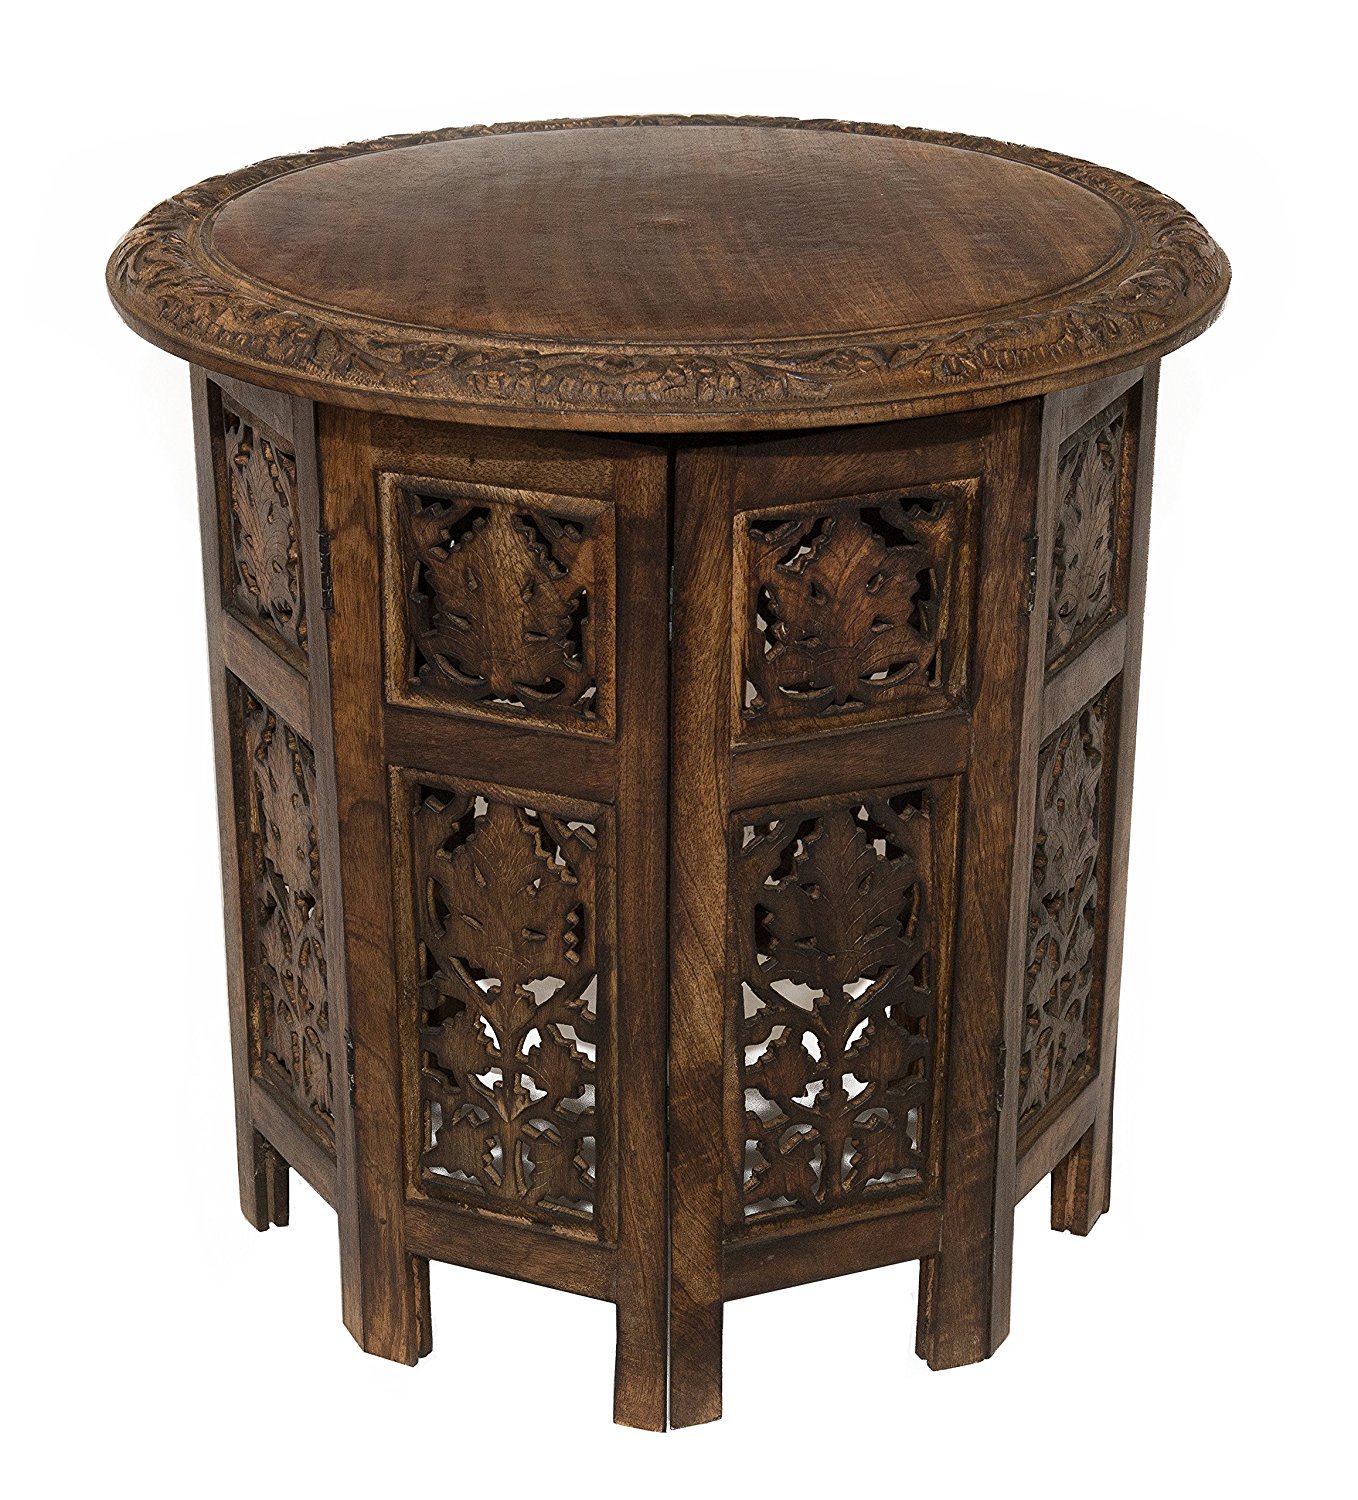 high round accent table probably terrific cool solid wood furniture unique end tables side coffee square and sets drum nightstand small black night flower centerpieces for narrow